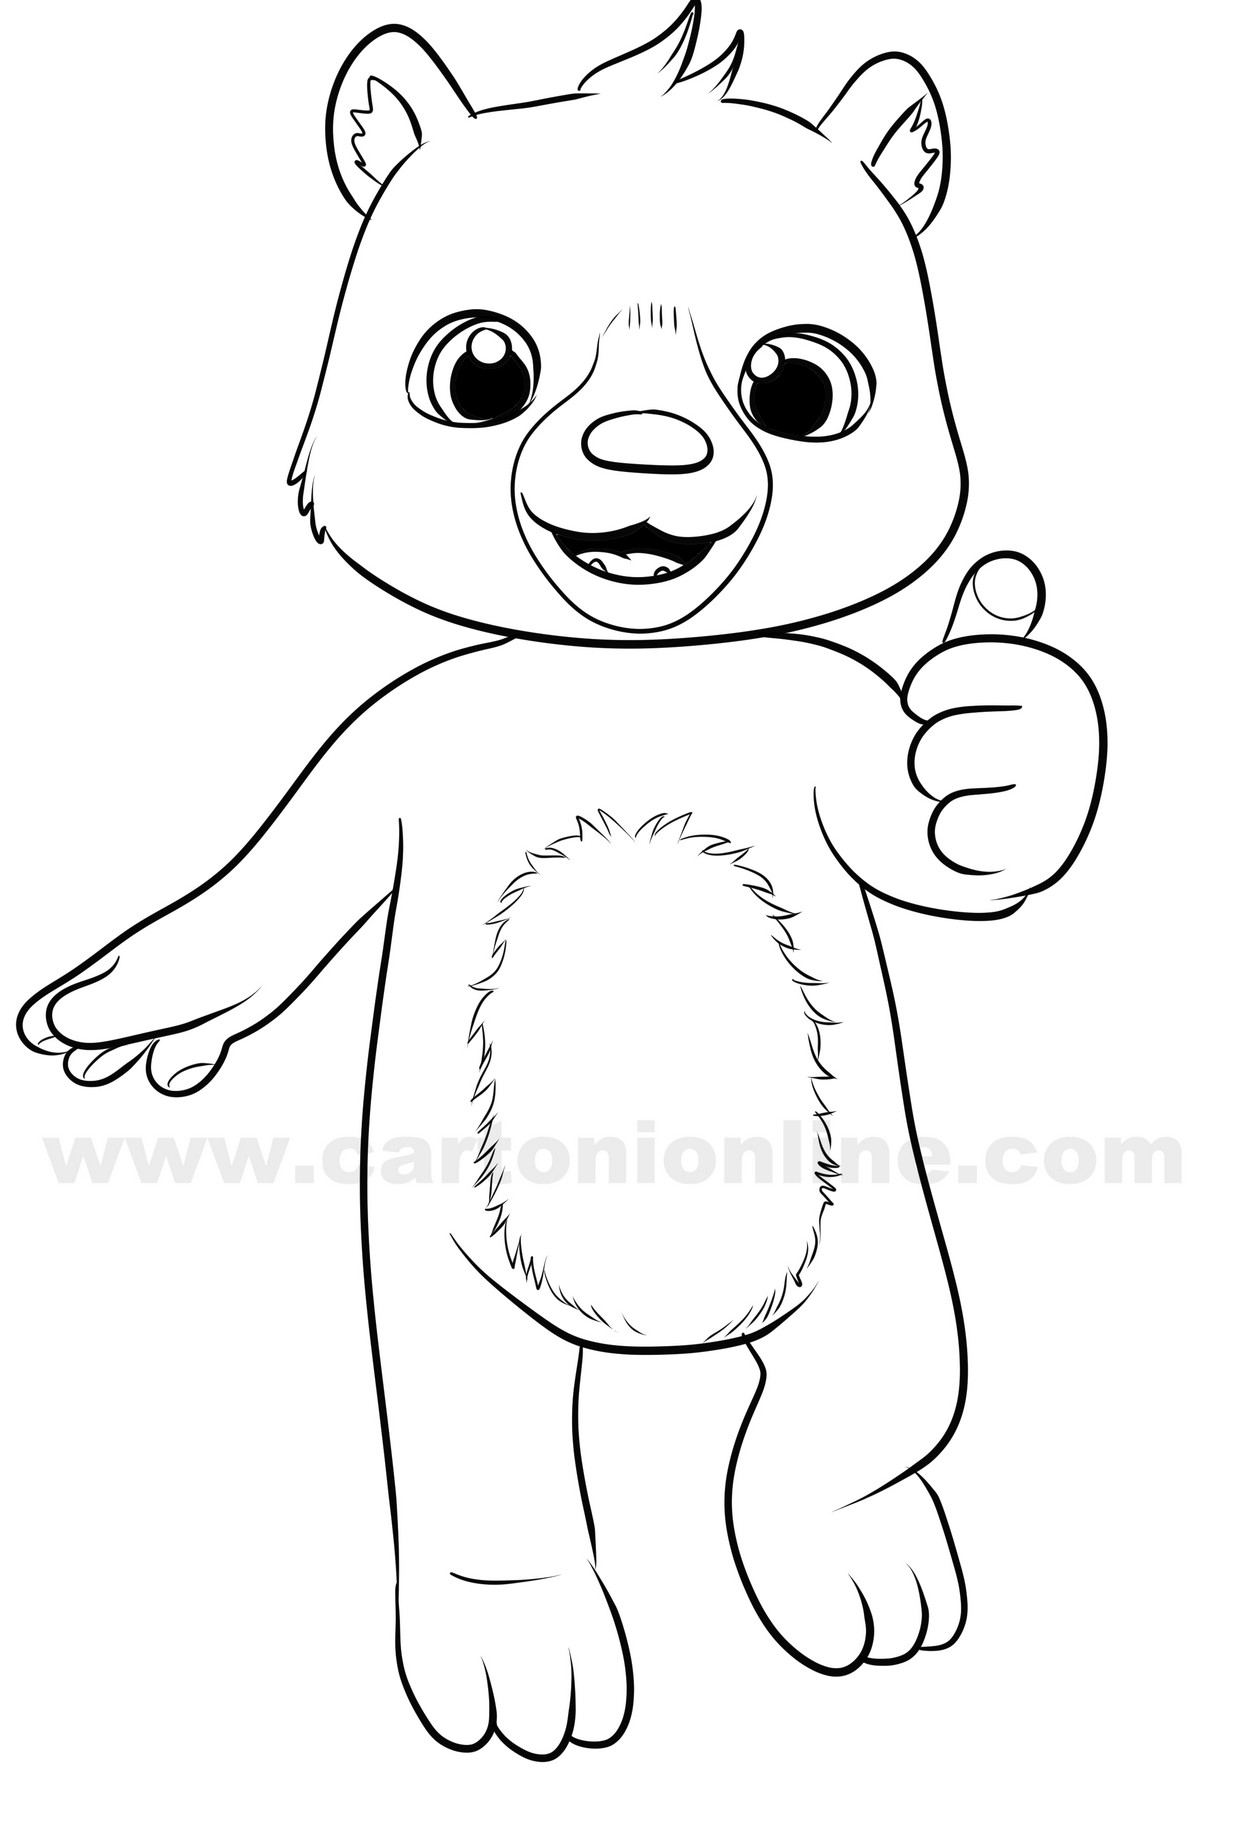 Boba Cocomelon coloring page to print and coloring